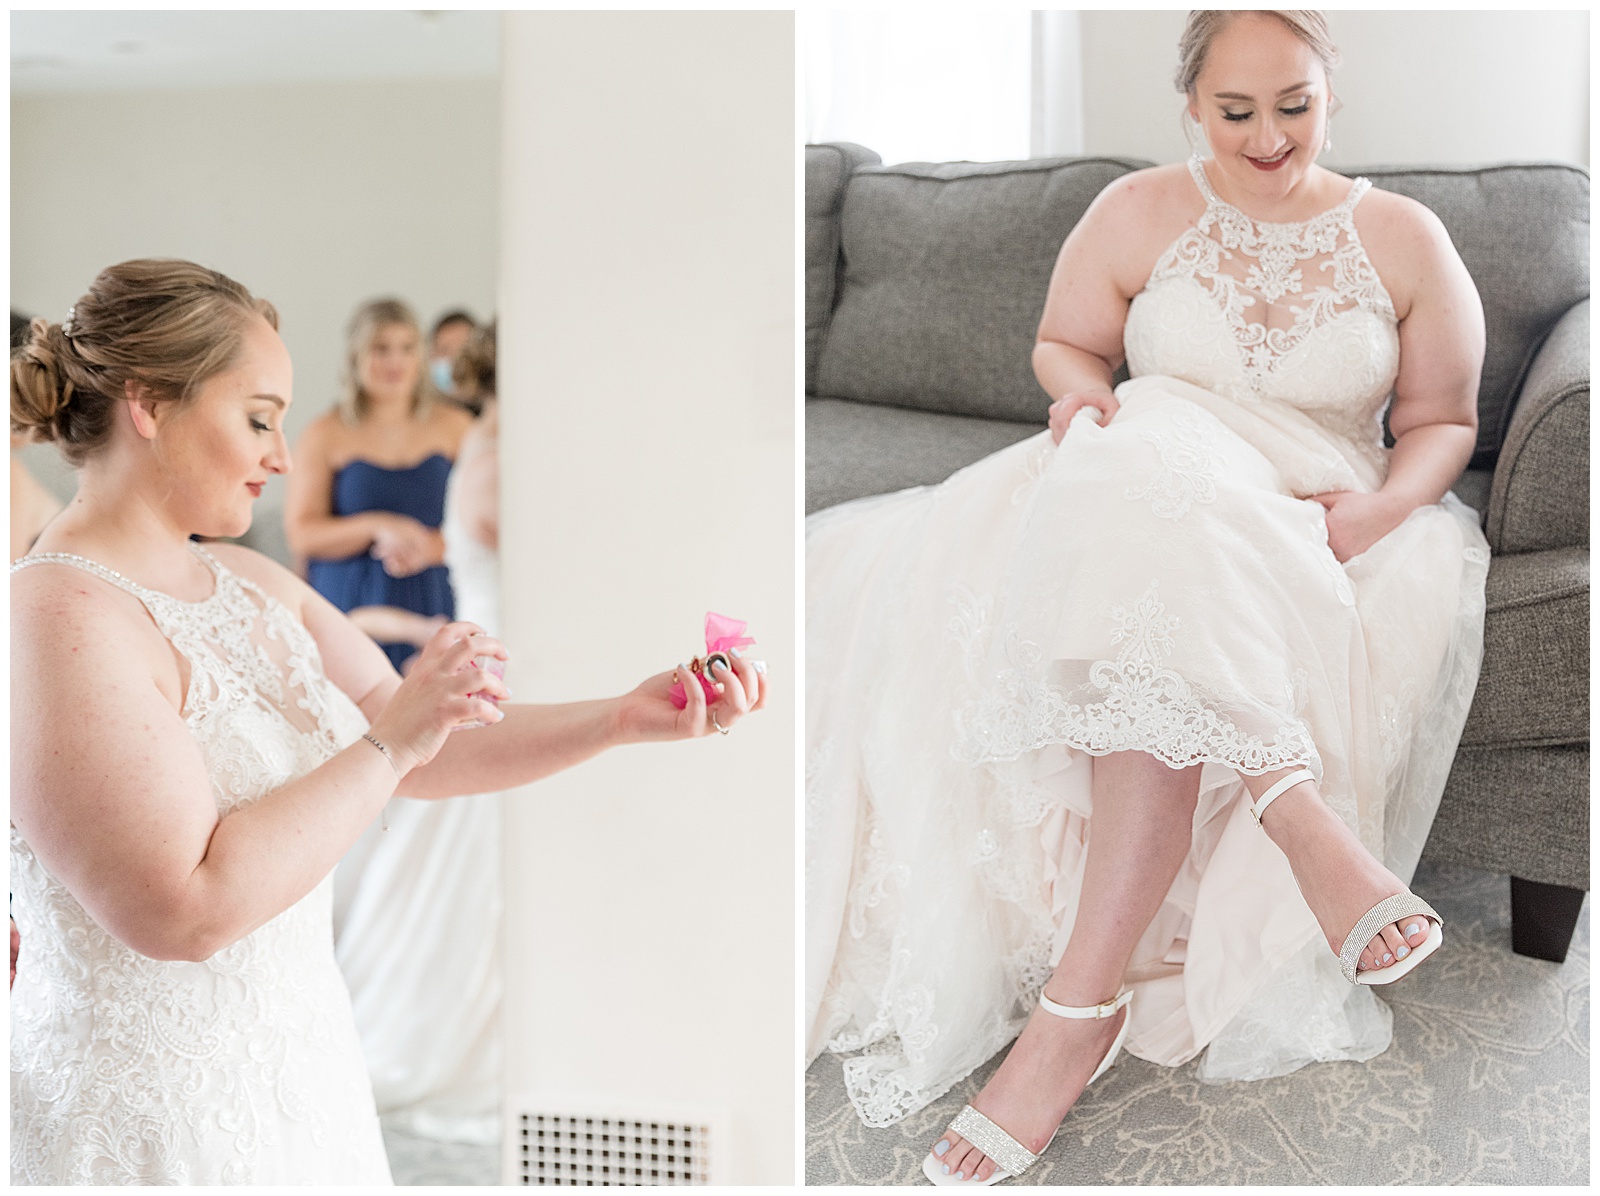 bride happily prepares and waits for her wedding day in bridal suite